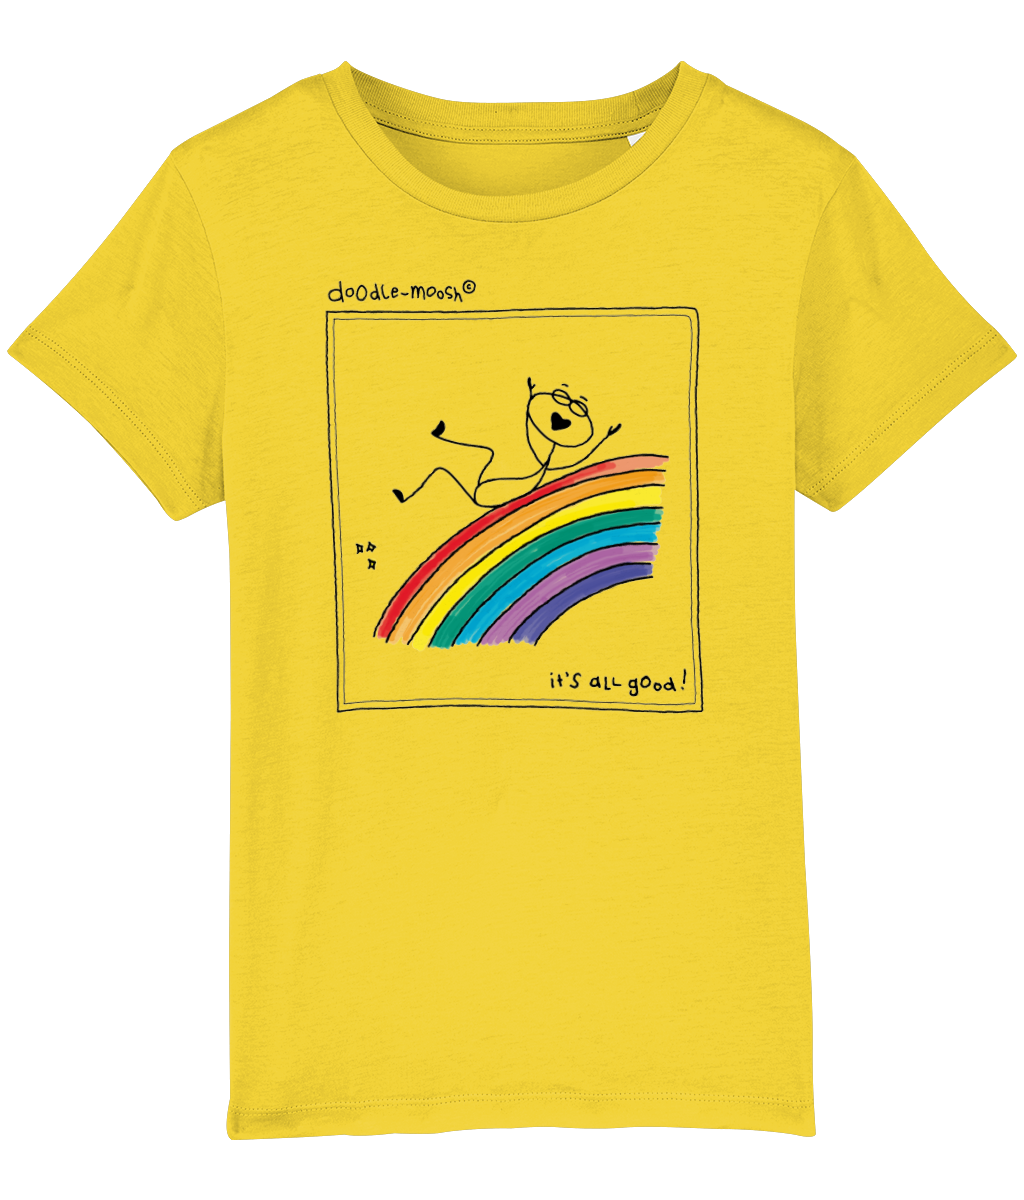 it's all good t-shirt, yellow with black, colored rainbow